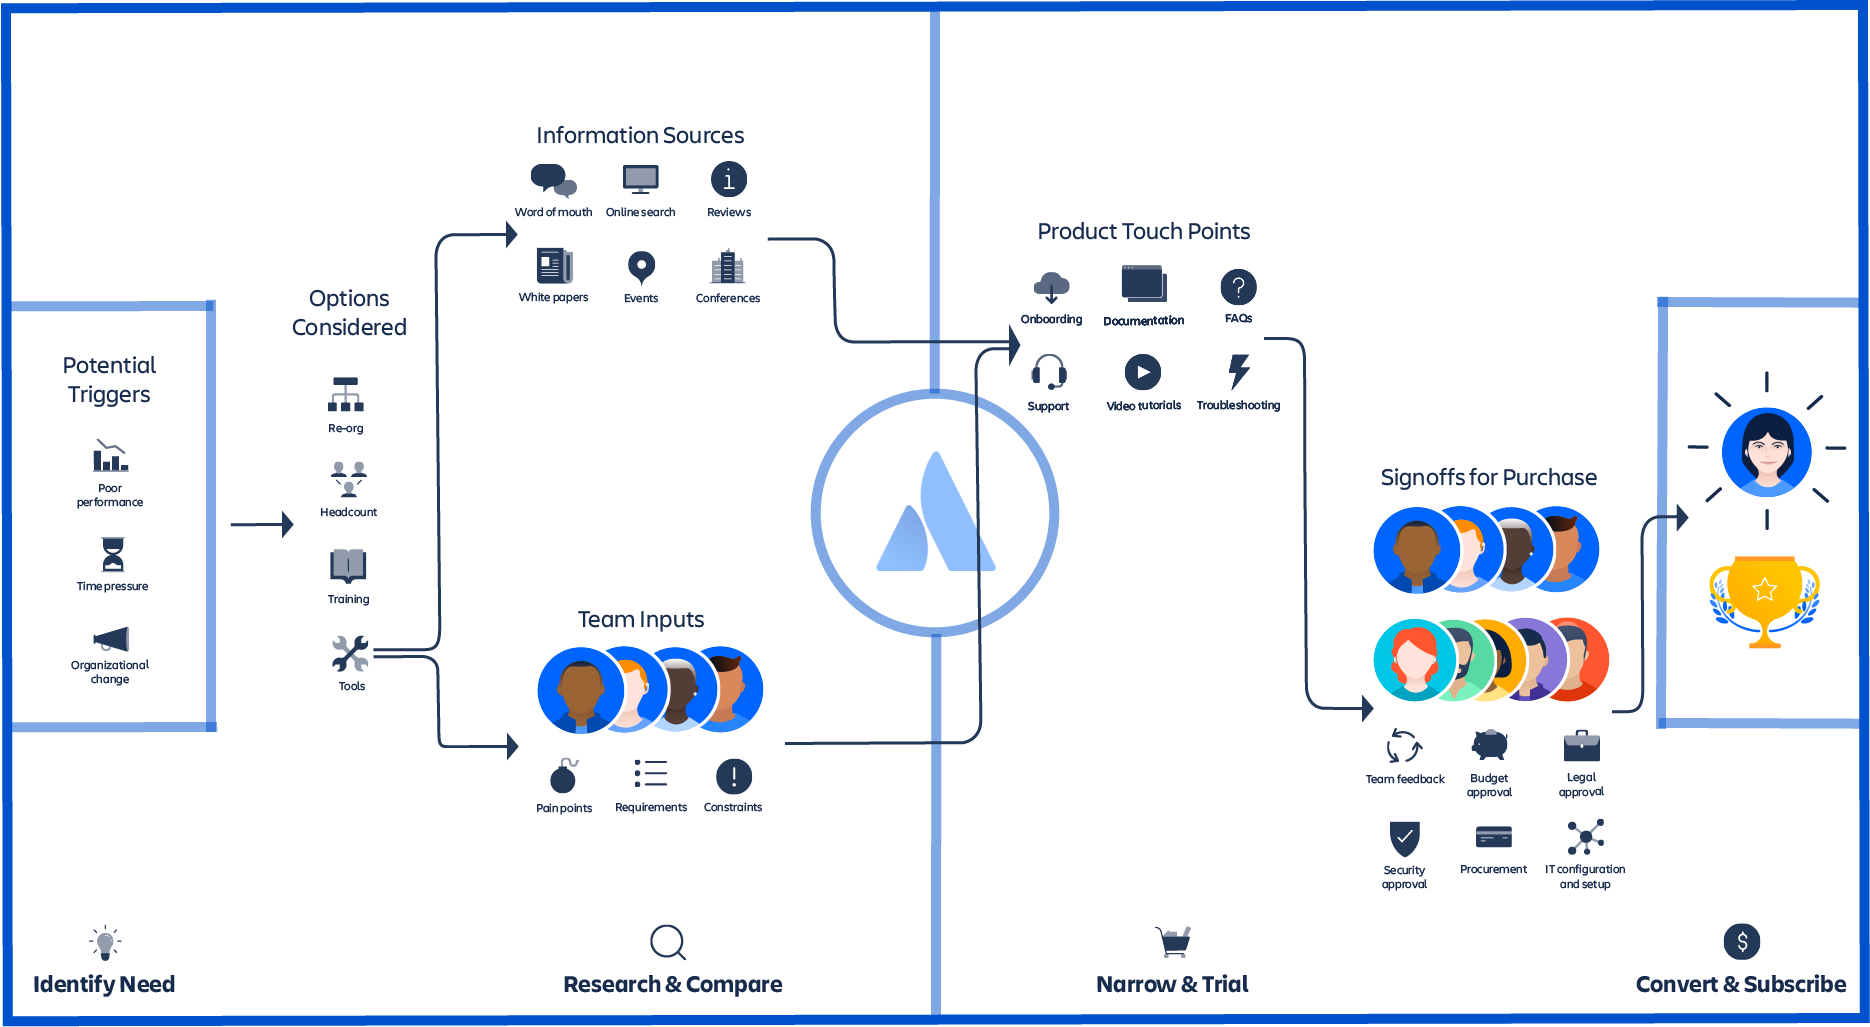 An illustrated diagram of a team purchase process. Areas include potential triggers, options considered, information sources, team inputs, product touch points, and signoffs for purchase